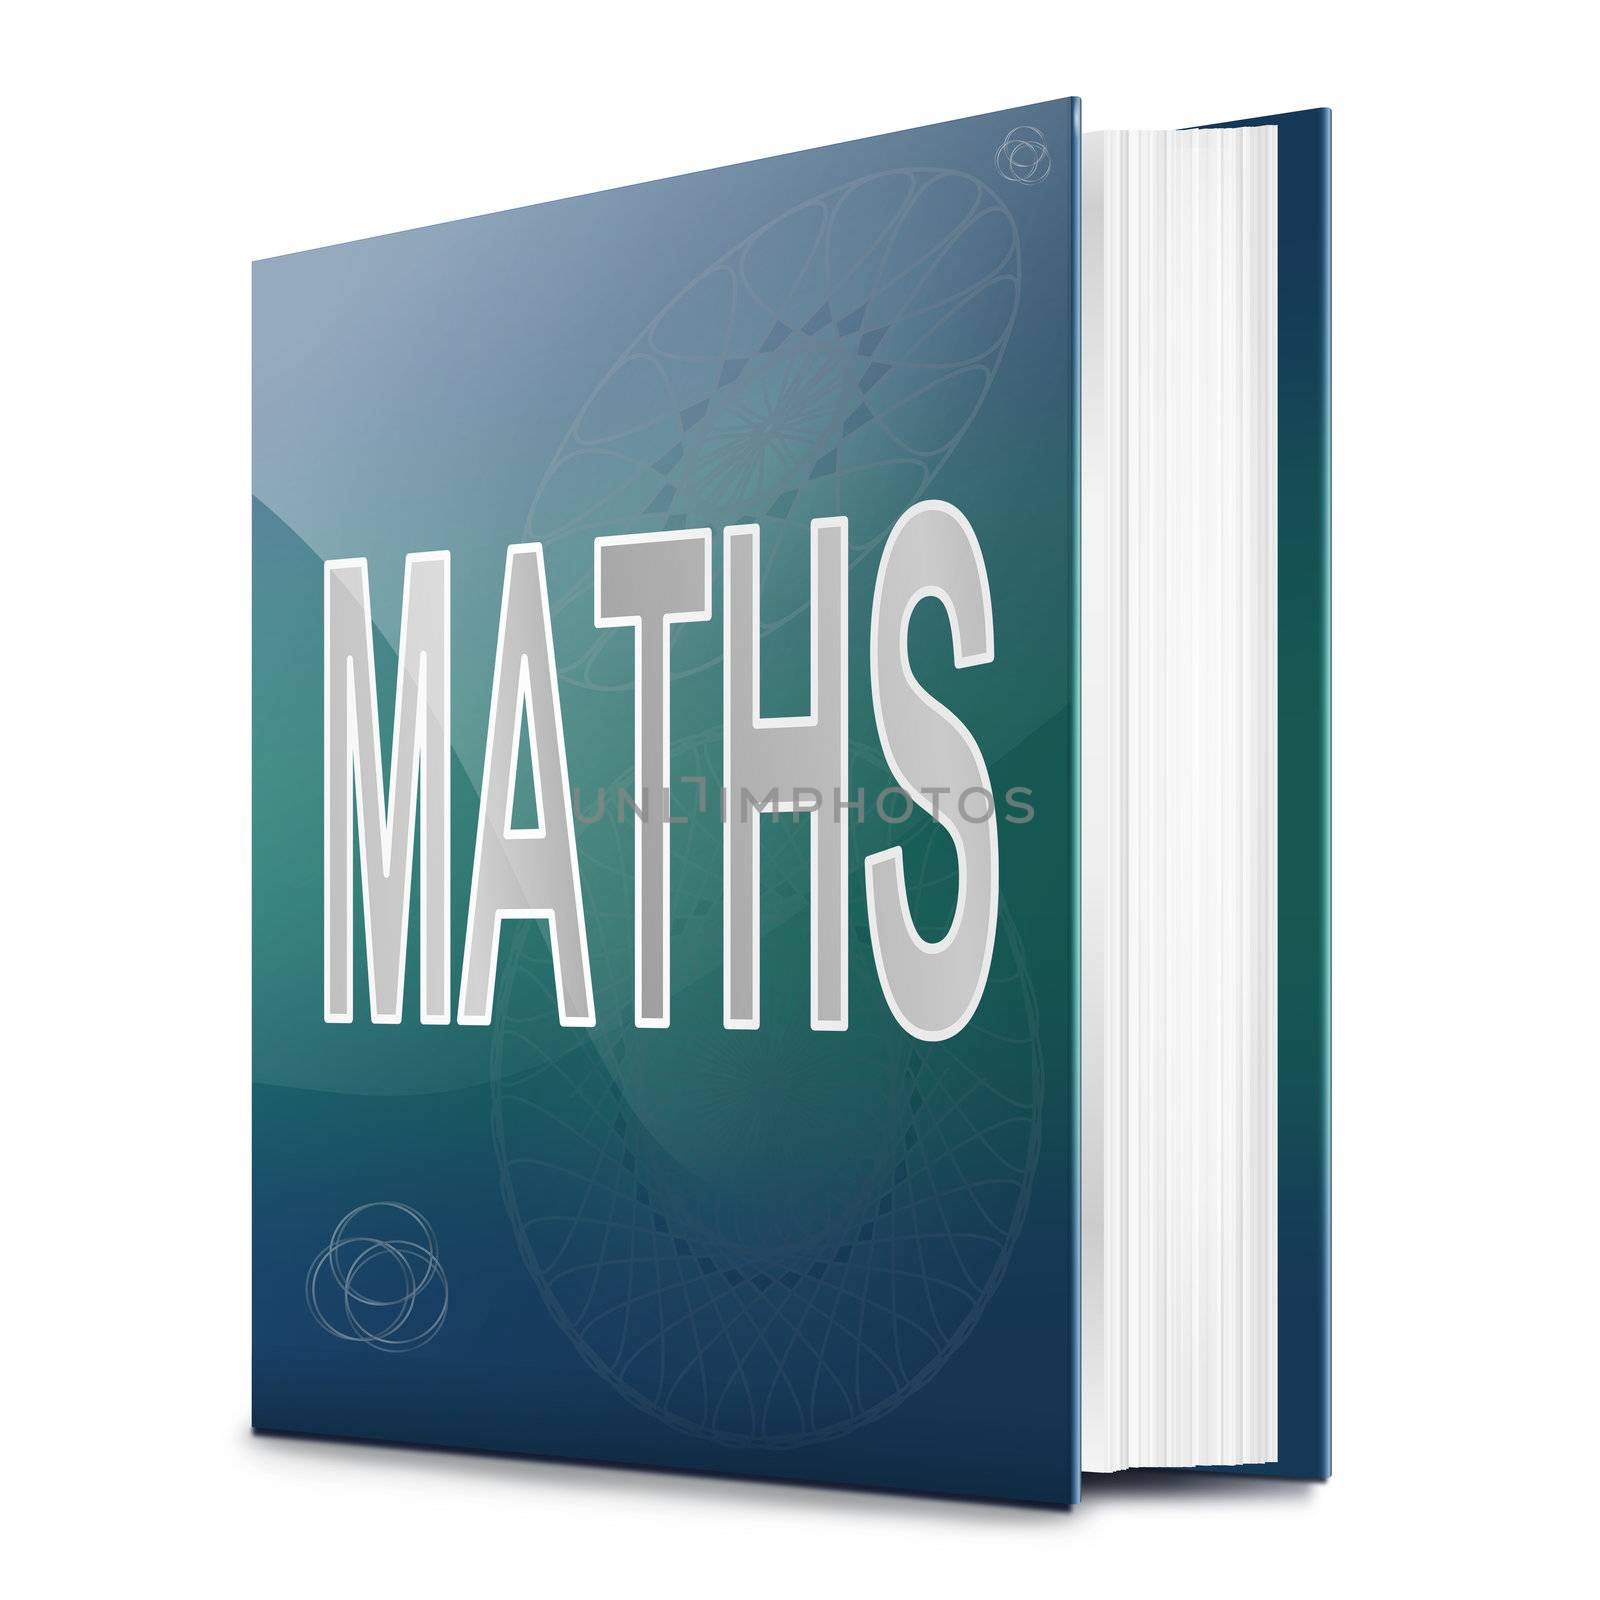 Maths book. by 72soul